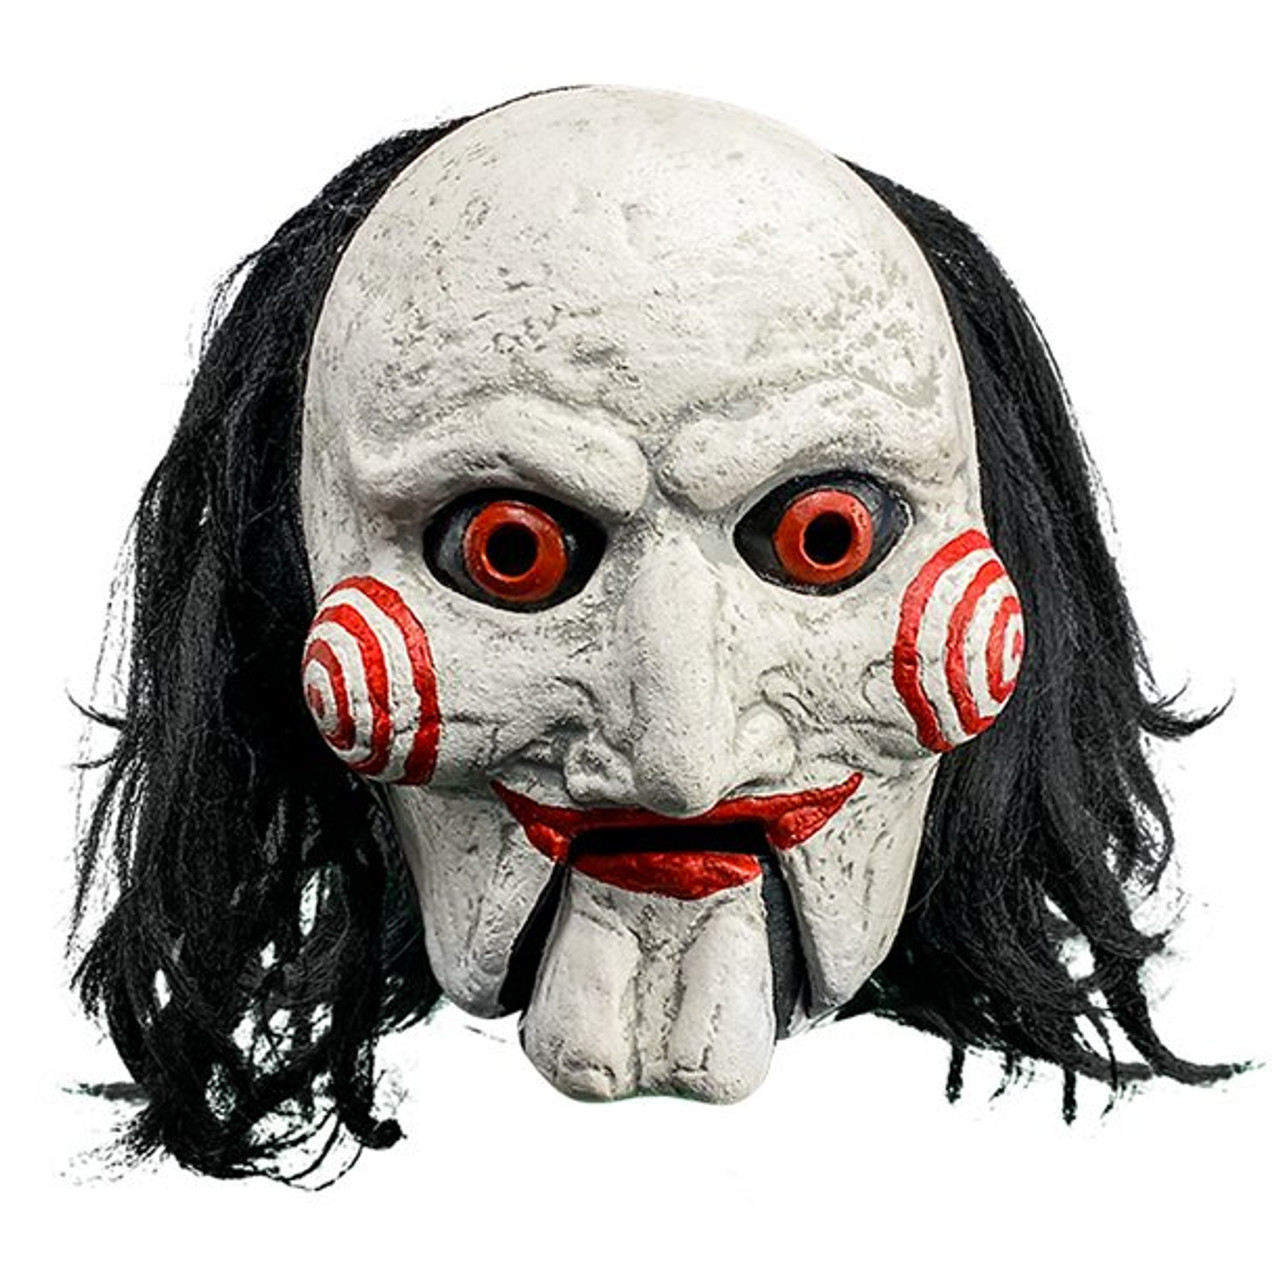 Billy Puppet Moving Jaw Latex Mask w/Hair Saw Adult Costume Accessory